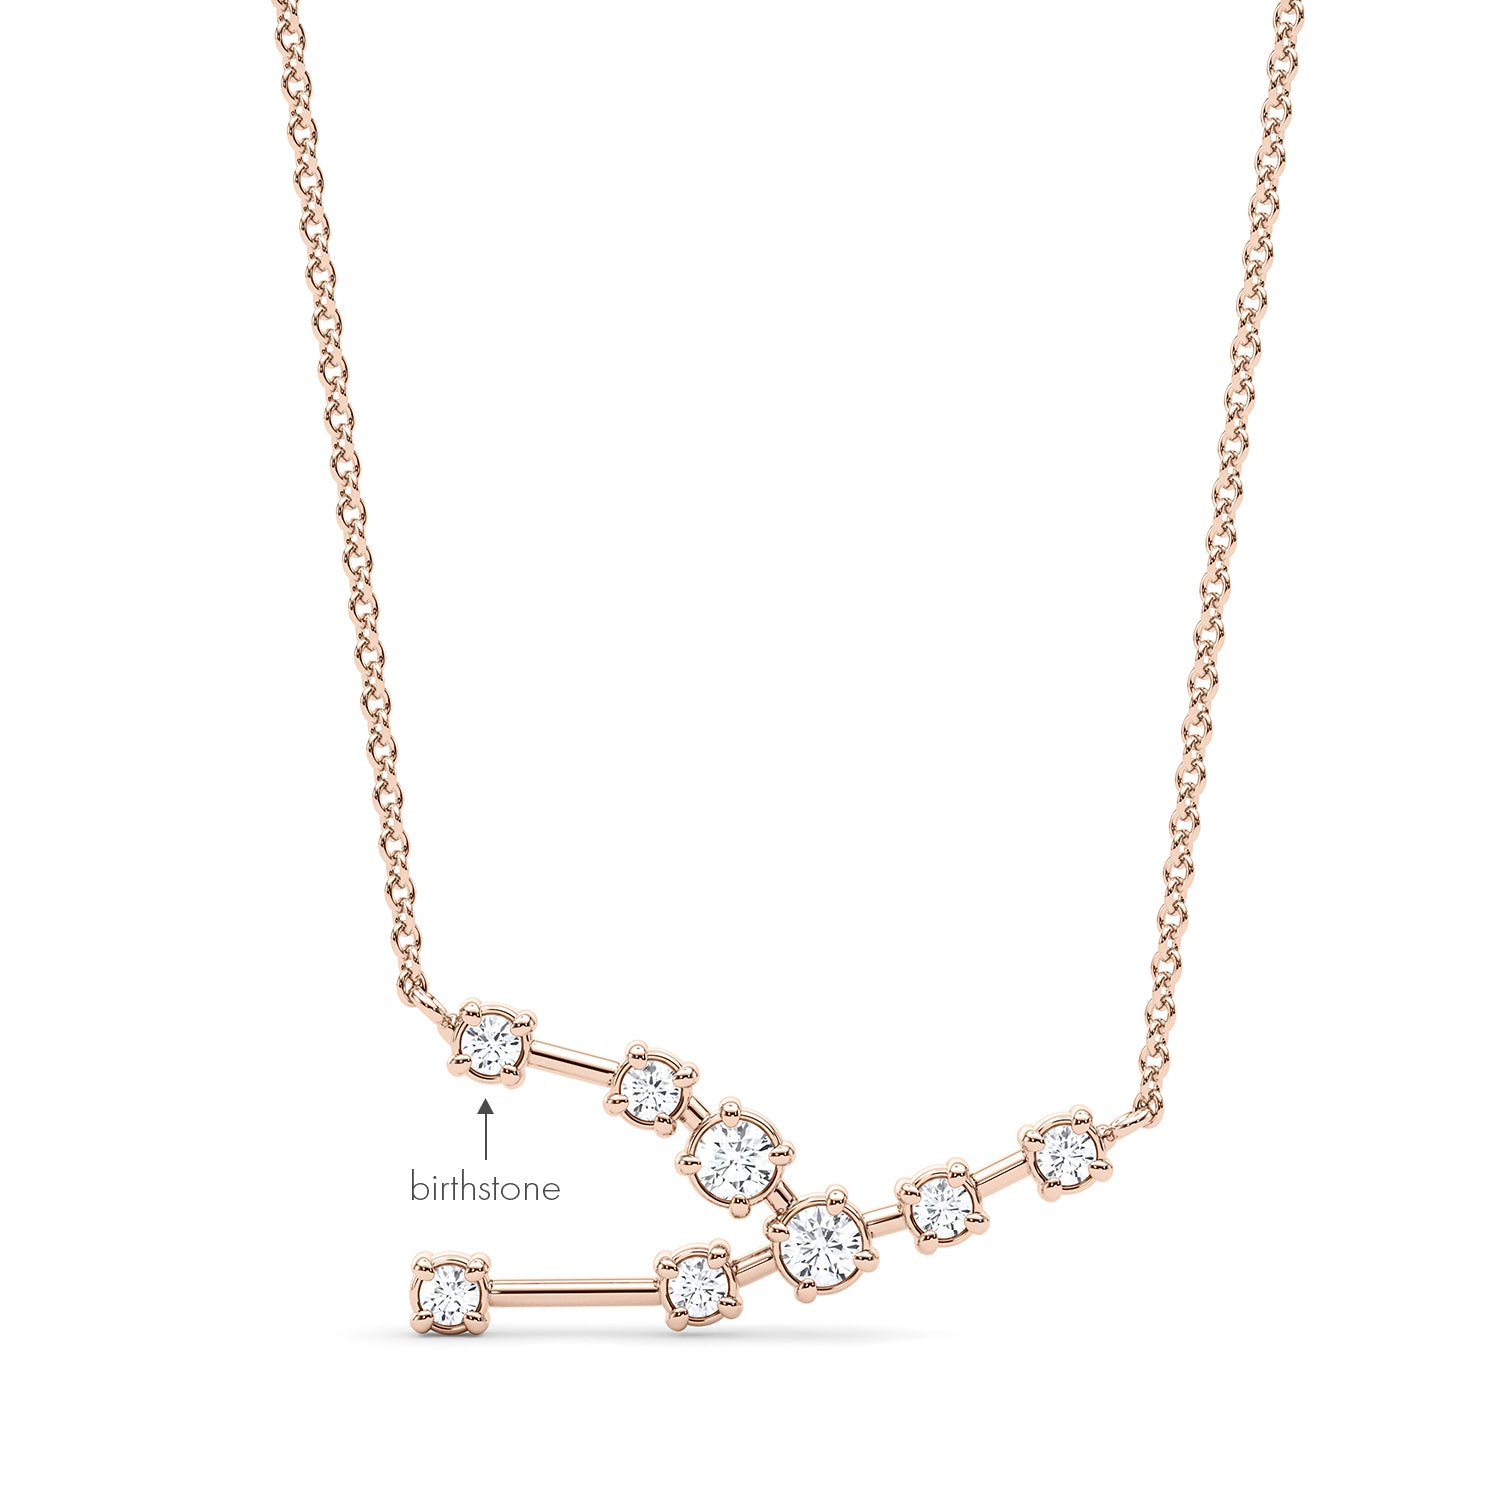 Aries Constellation Necklace - FAB Accessories Inc.